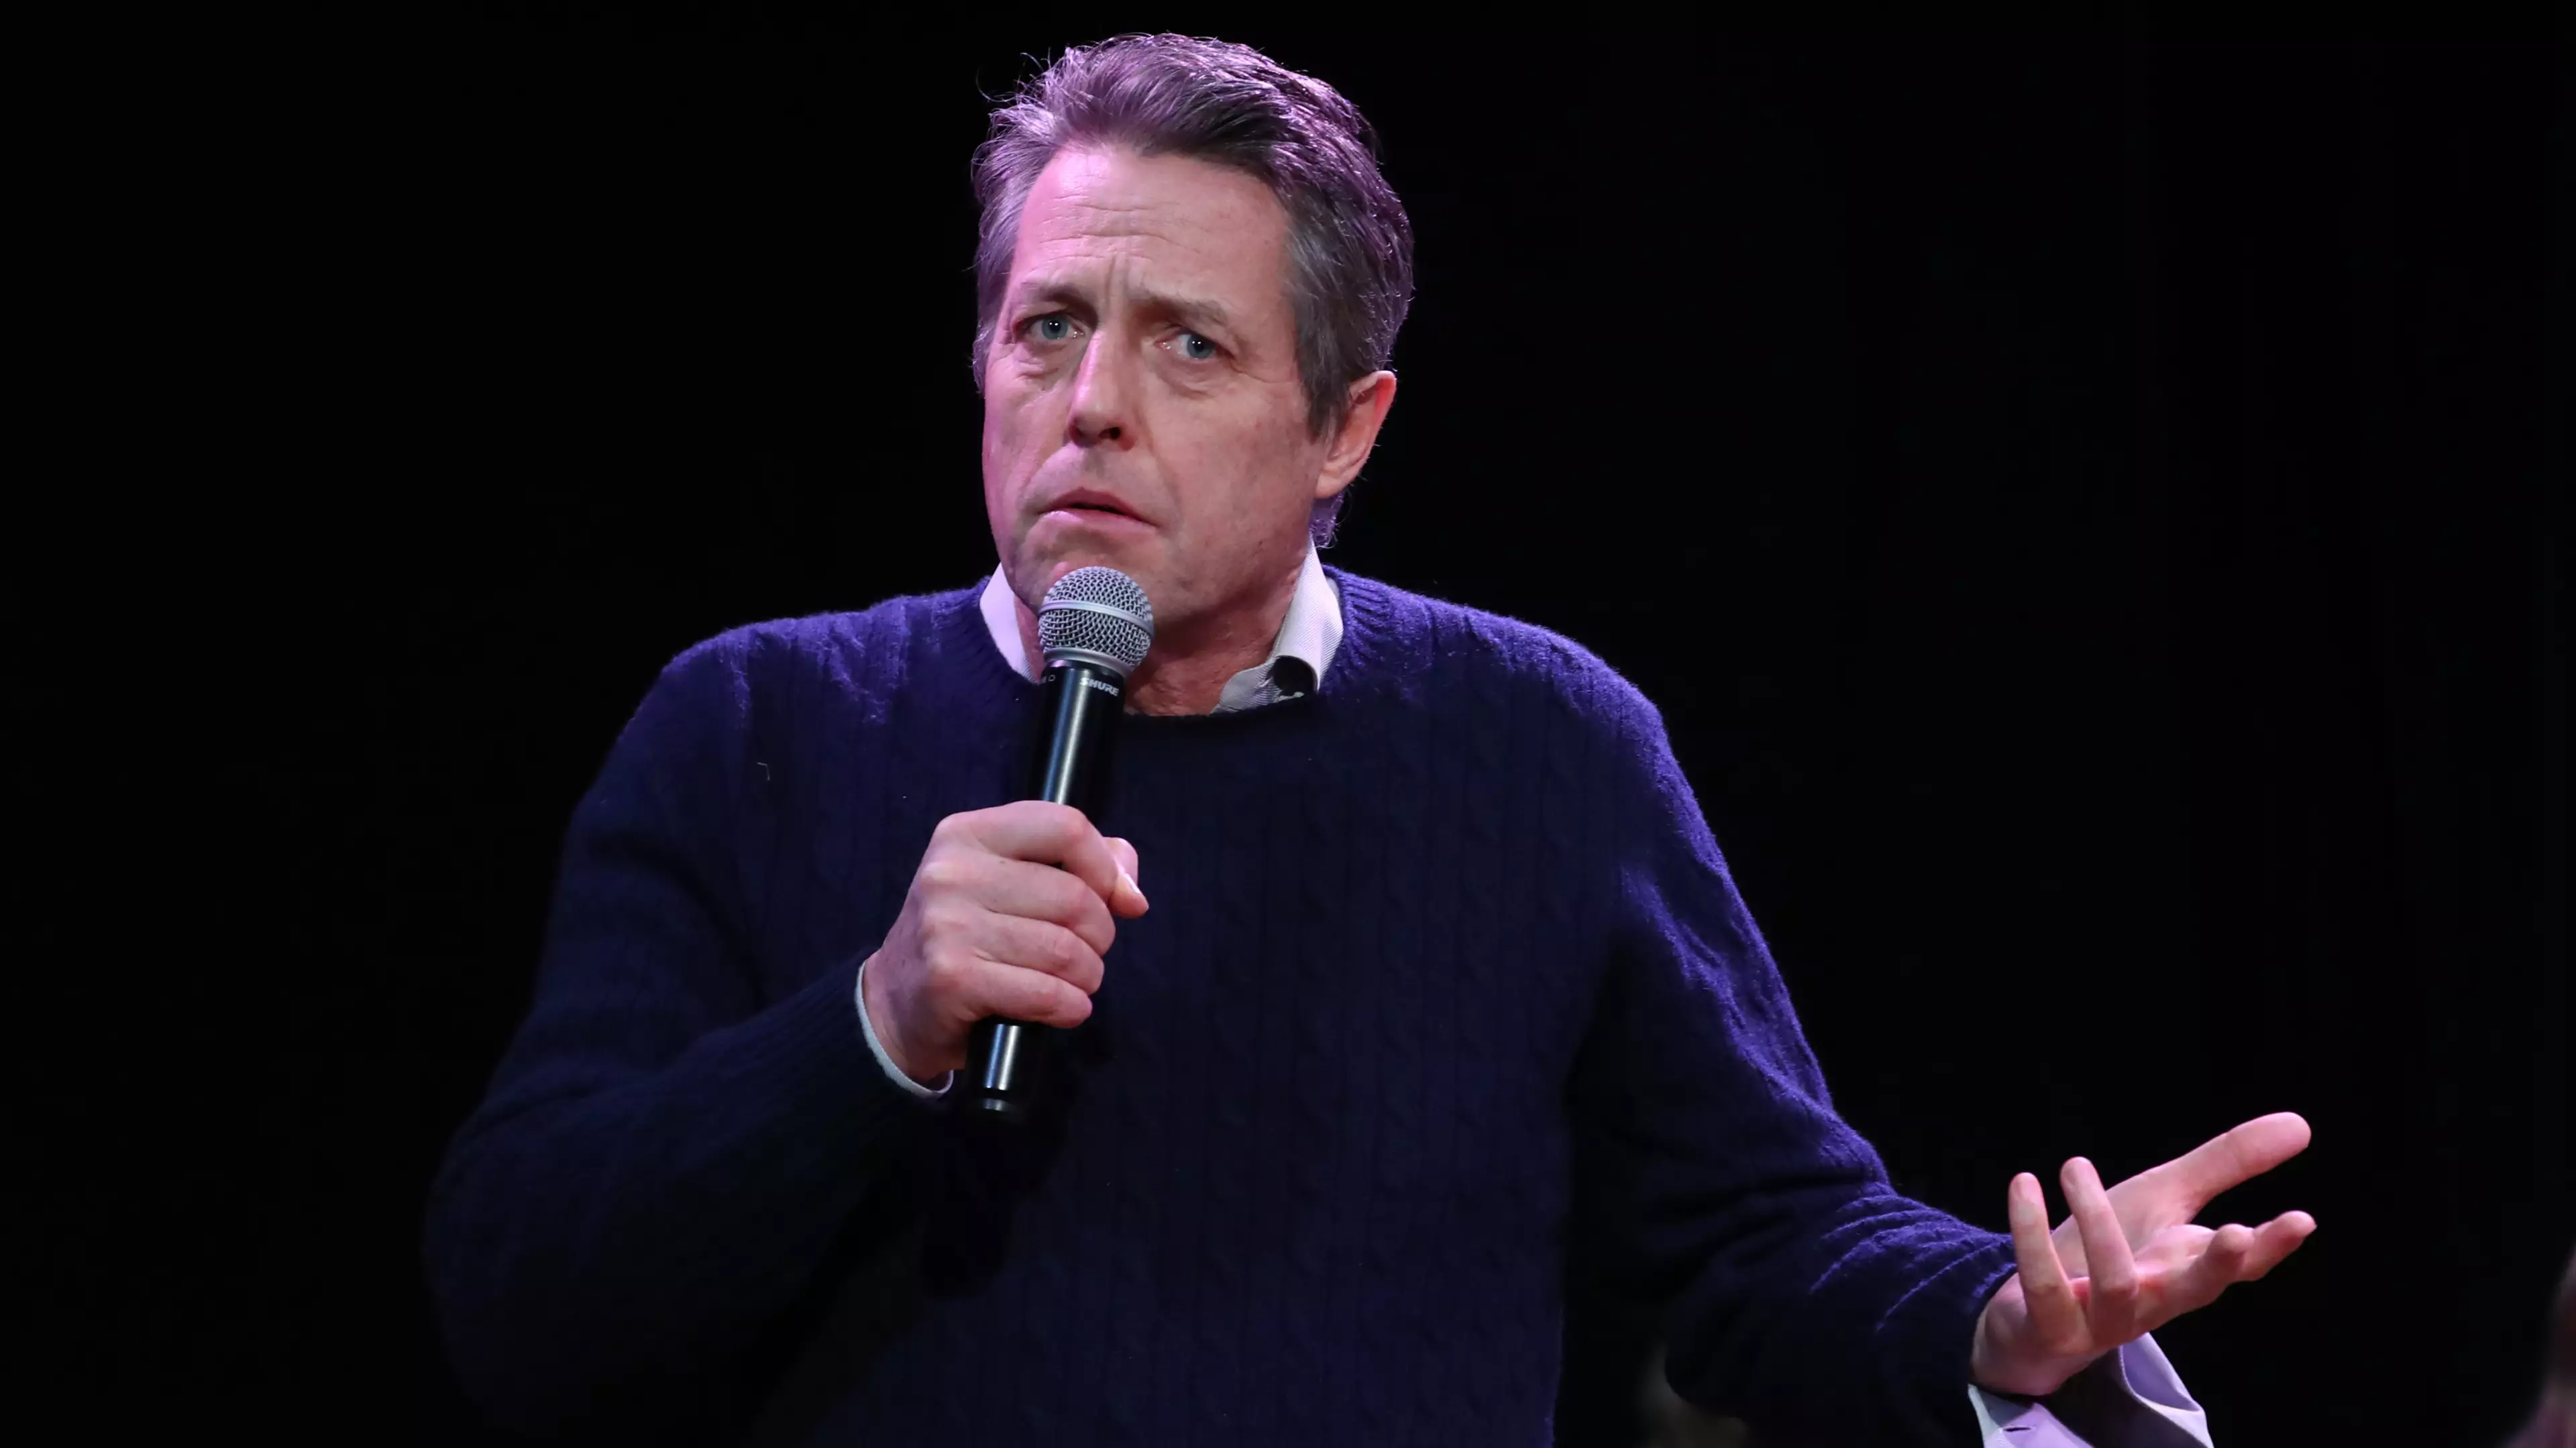 Piers Morgan And Hugh Grant Get Into Twitter Spat Over General Election